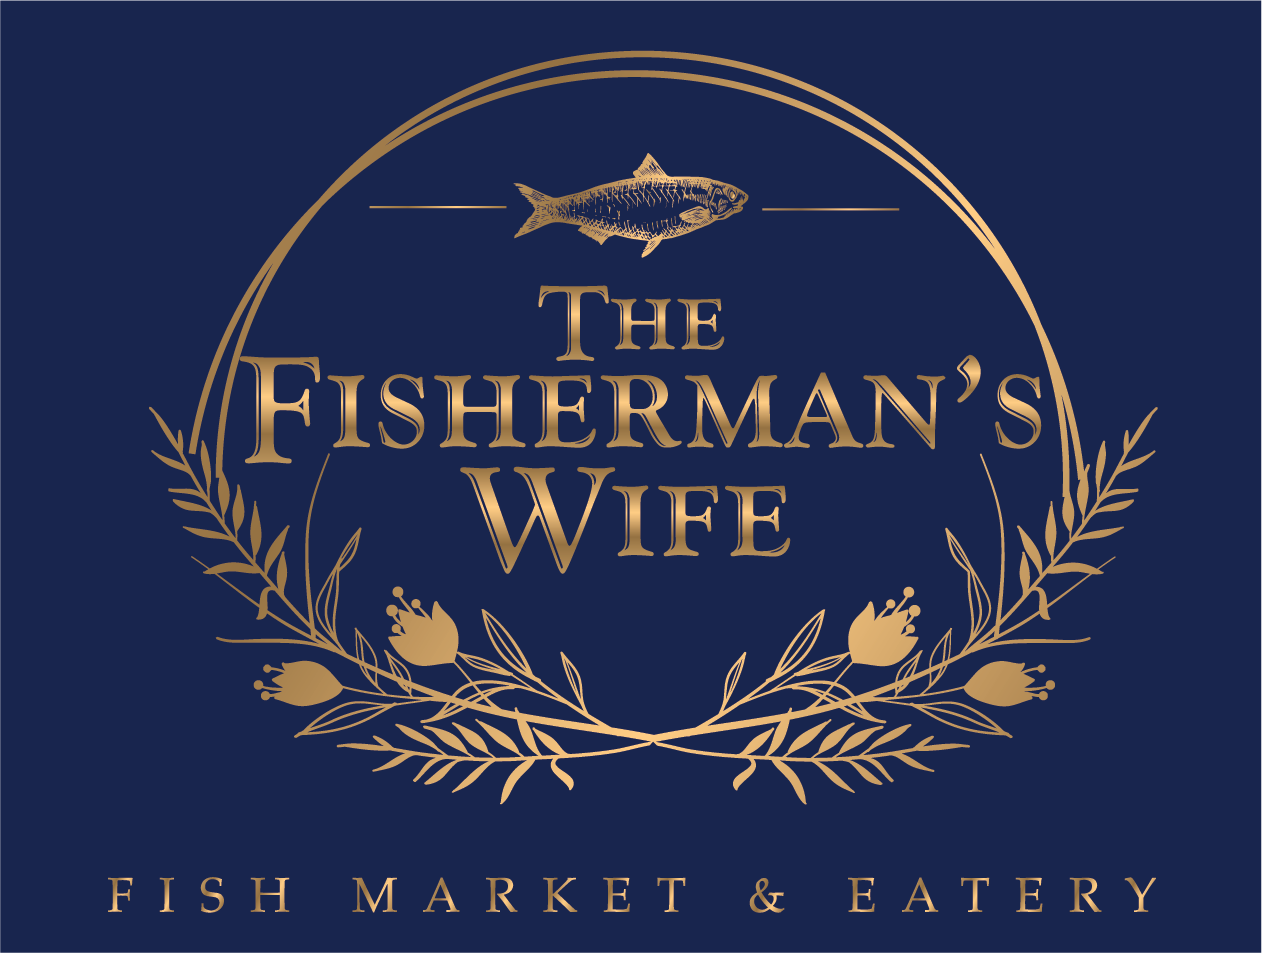 The Fisherman's Wife 1610 Thousand Oaks Boulevard
Suite C